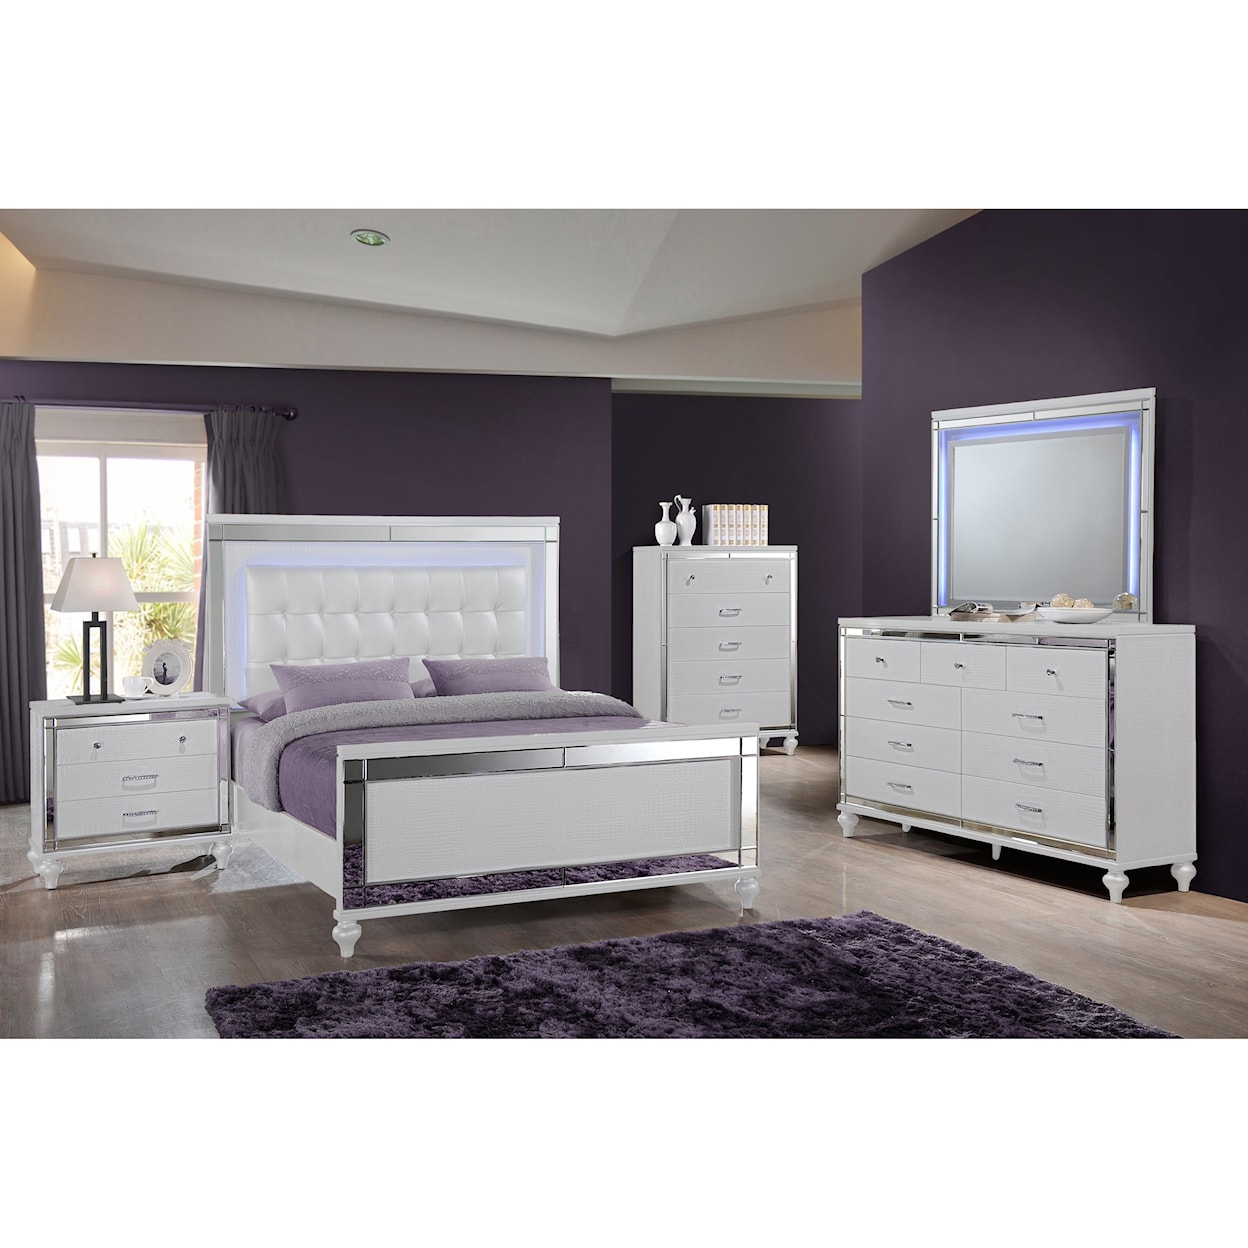 New Classic Valentino California King Bedroom Group